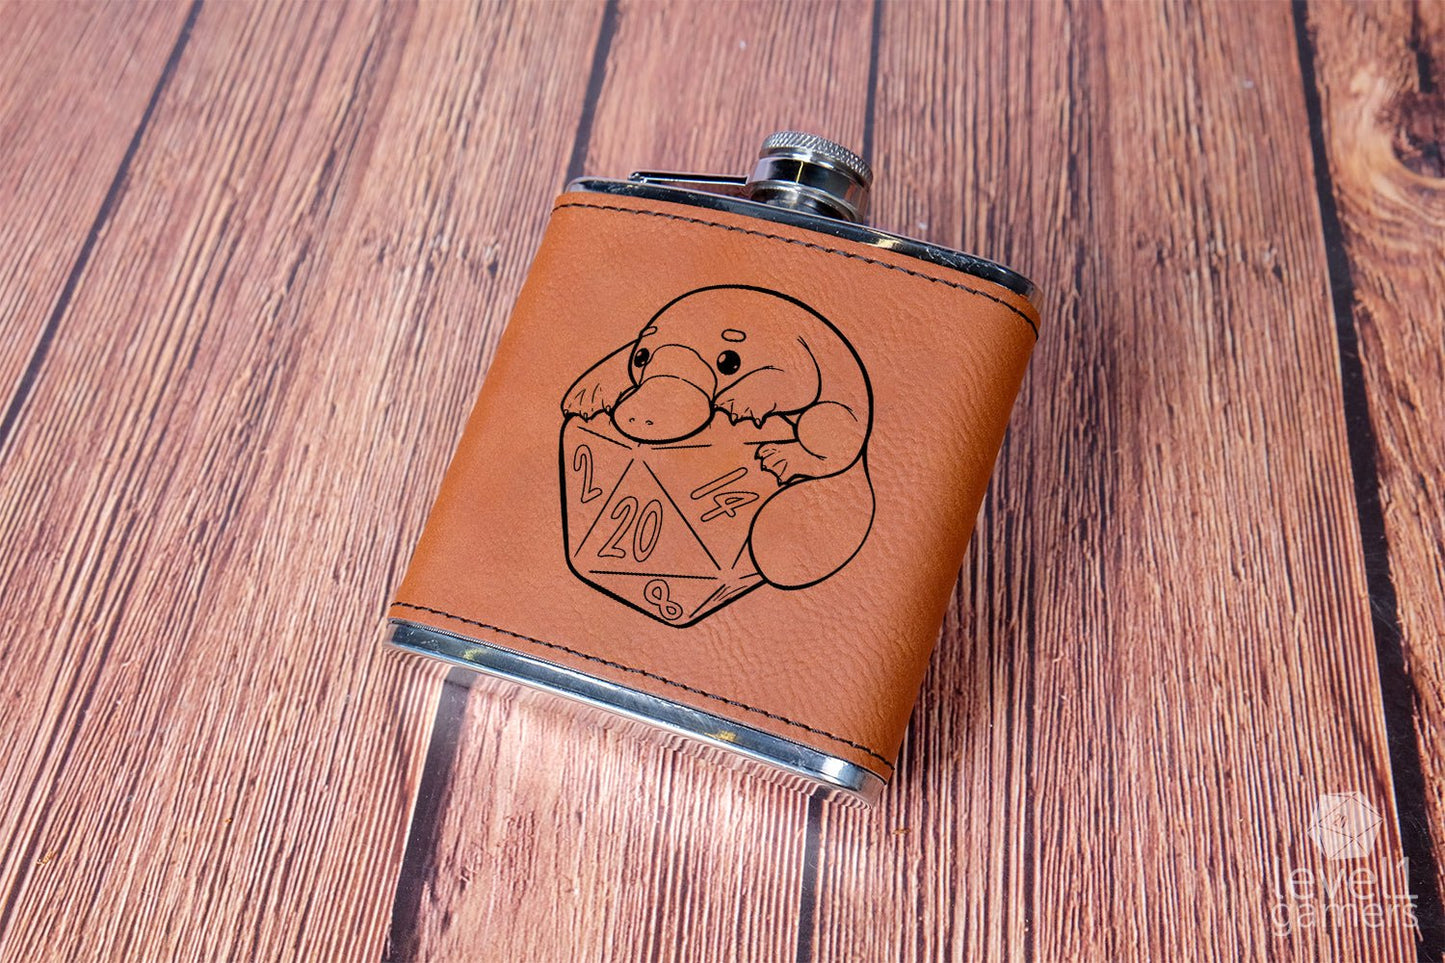 D20 Platypus Flask  Level 1 Gamers   